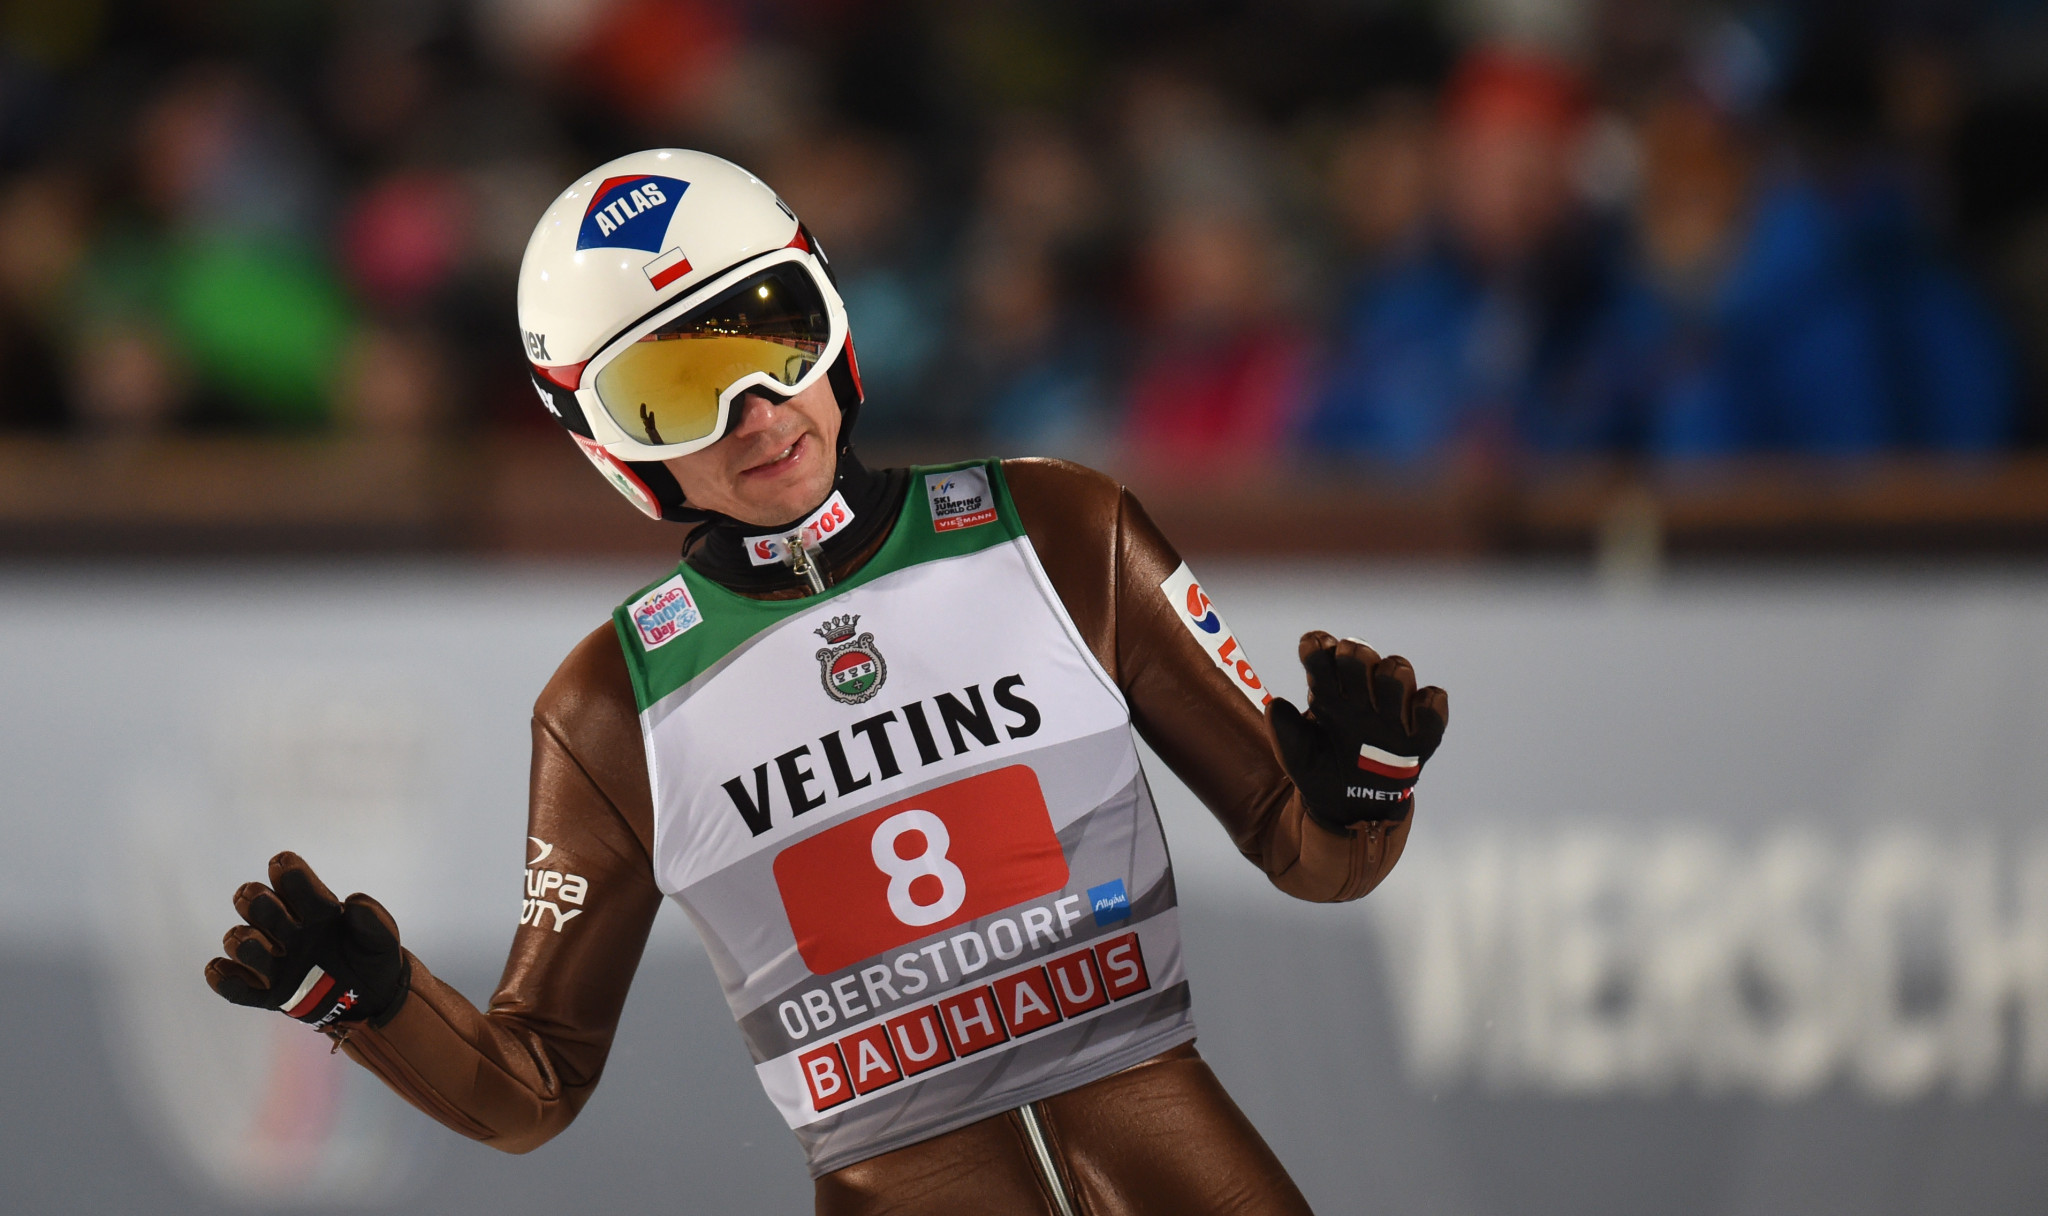 Defending Four Hills champion Kamil Stoch currently sits in sixth place overall ©Getty Images